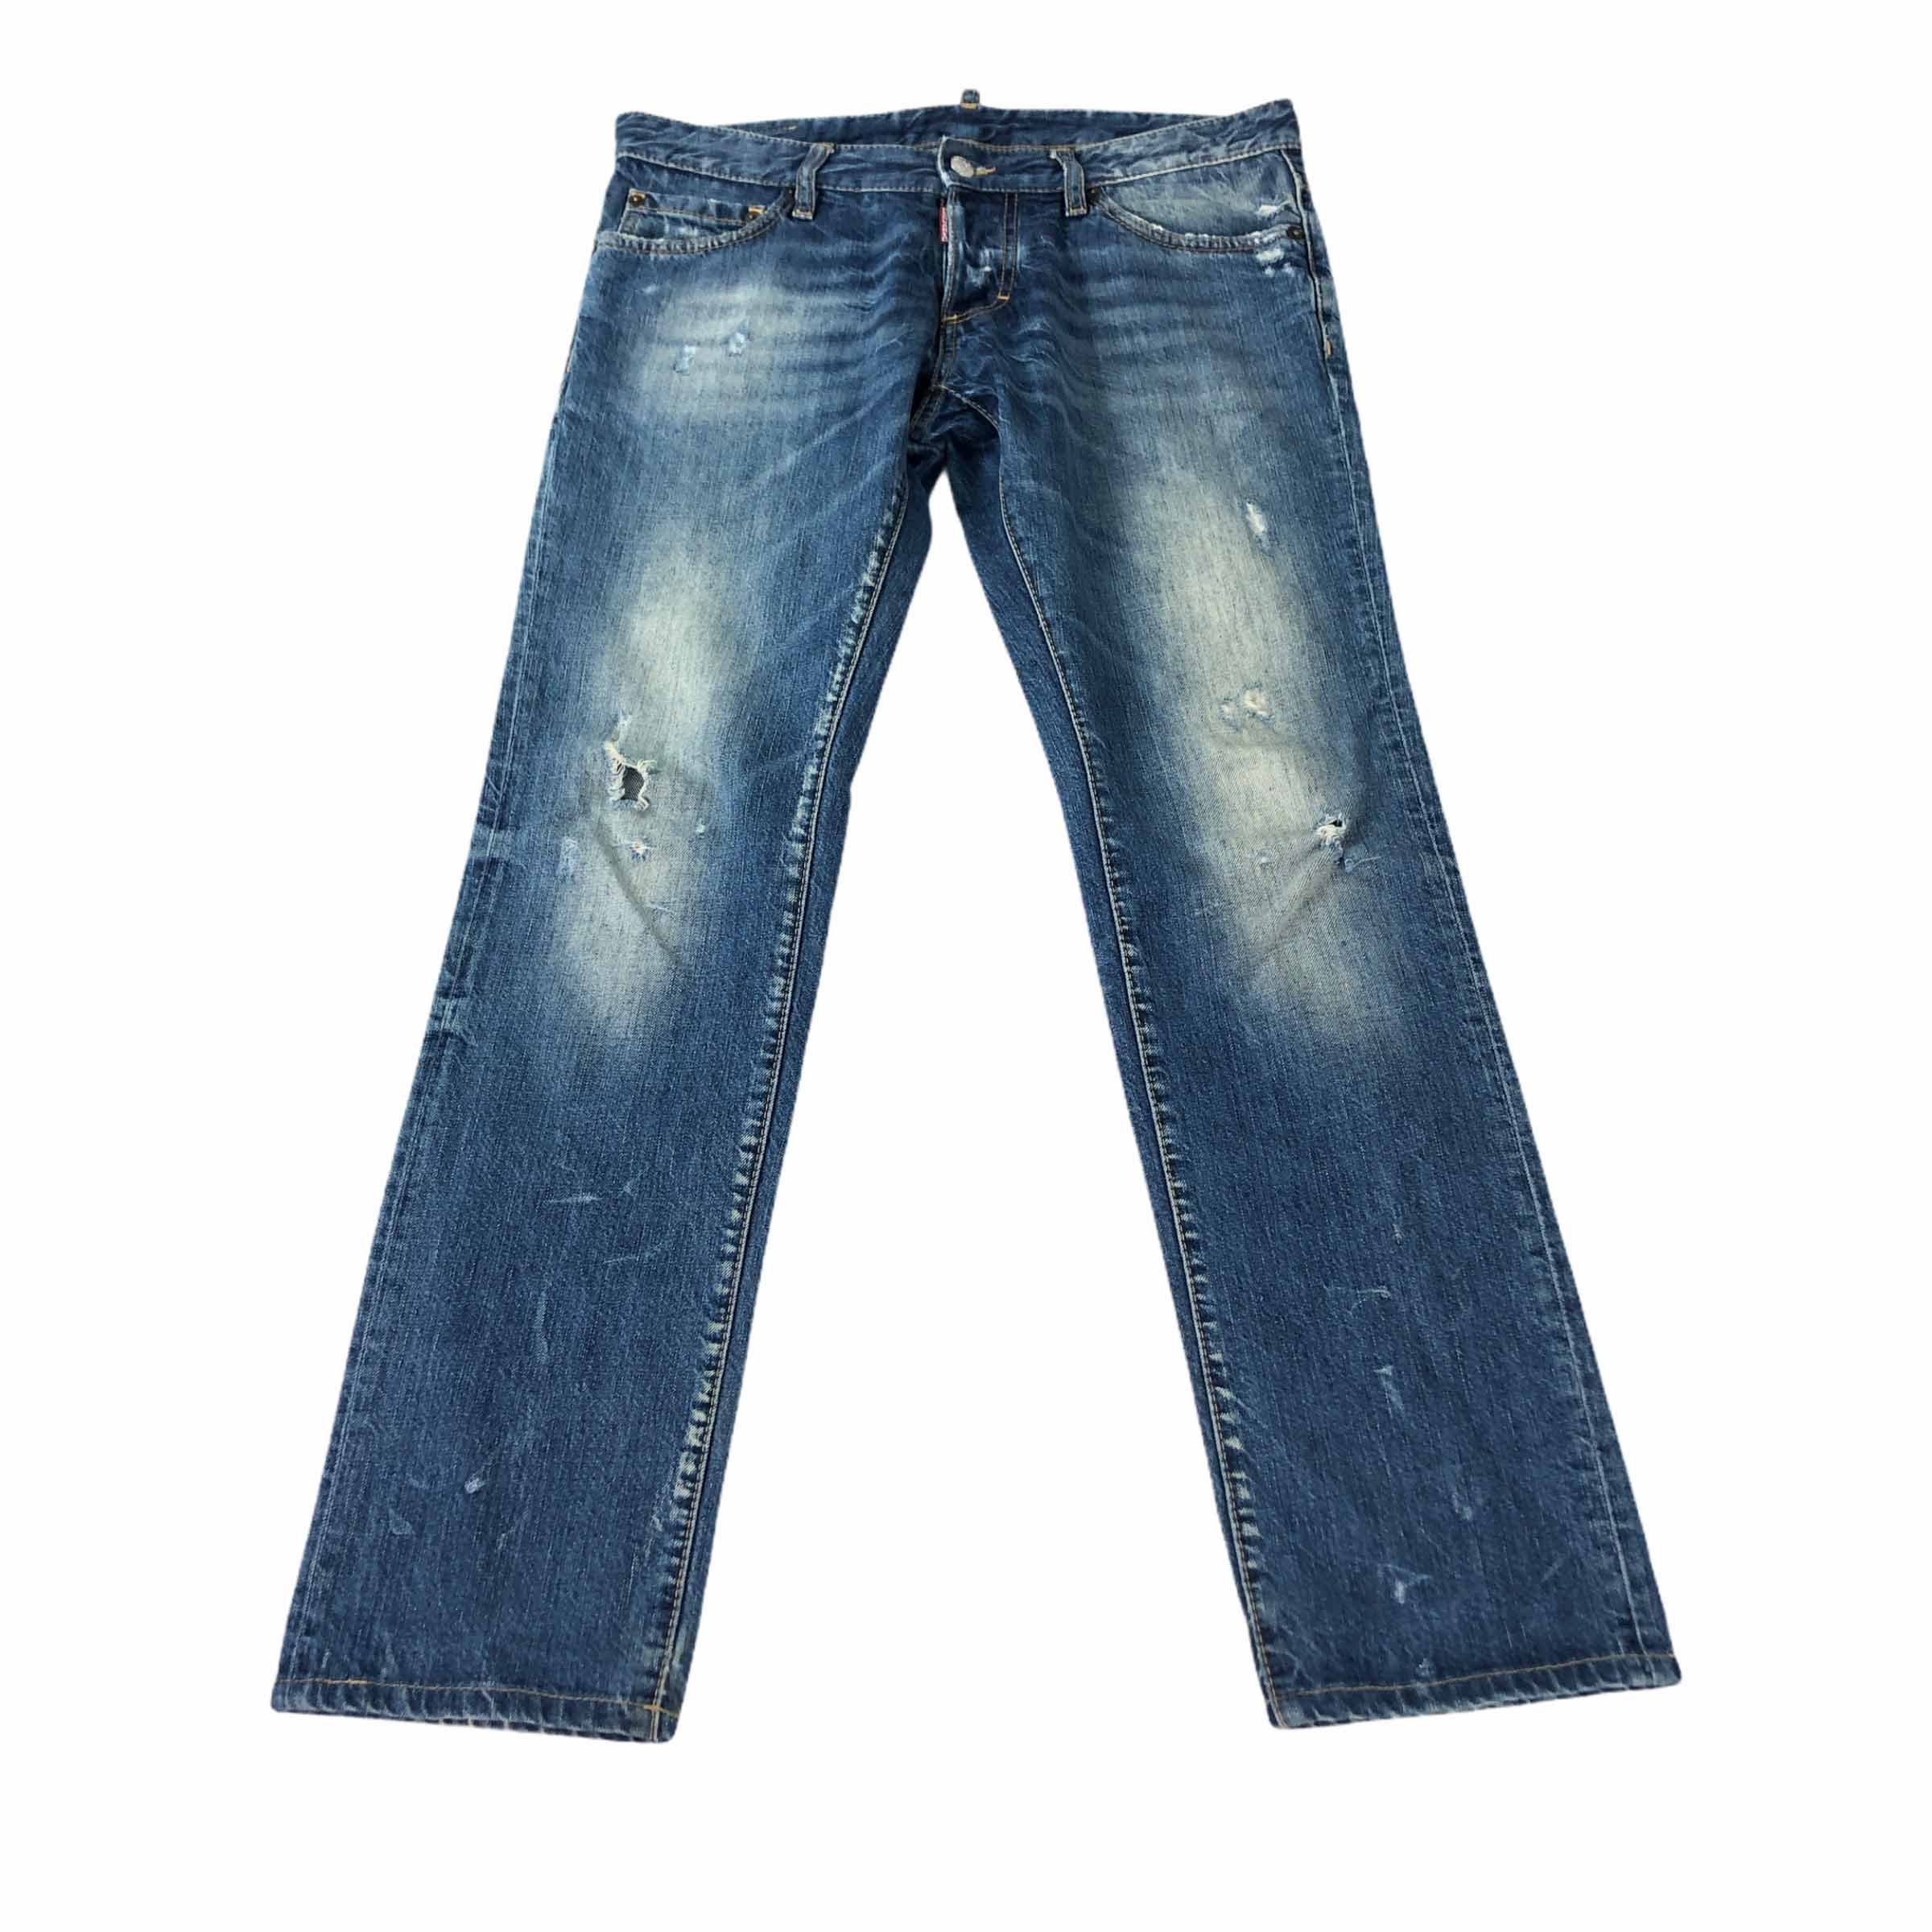 [DSQUARED2] Destroyed Jeans - Size 46